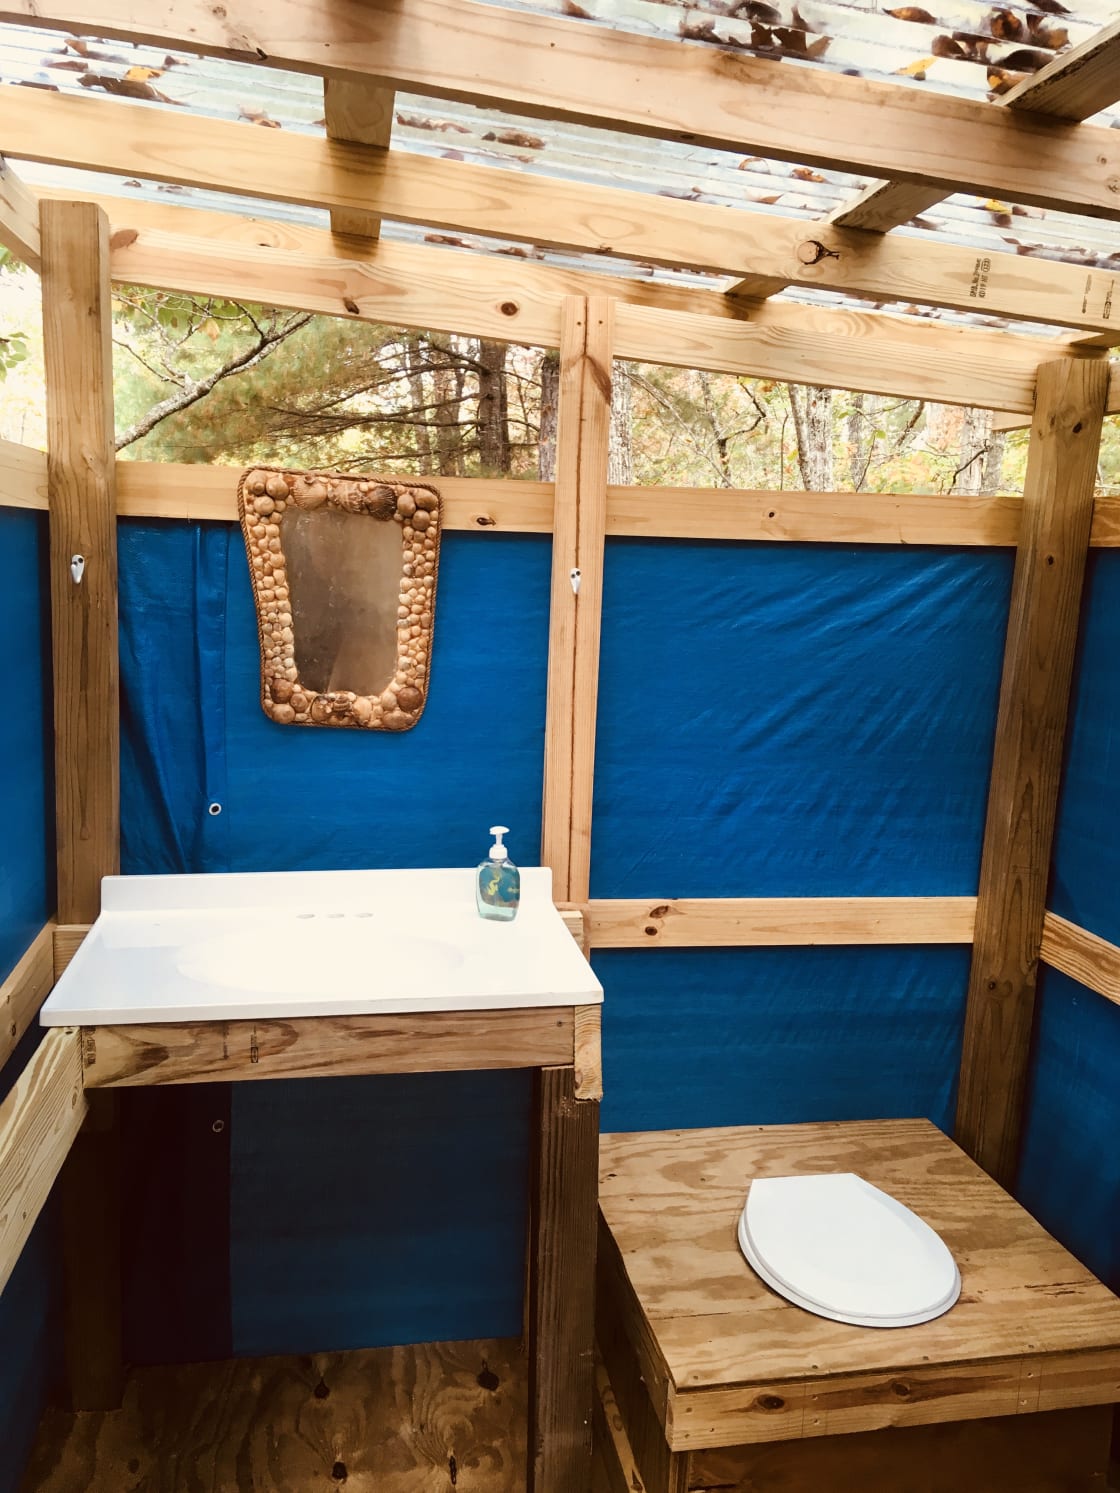 The composting pit toilet is open-air, but enclosed for privacy and has hooks galore to hang your important things.